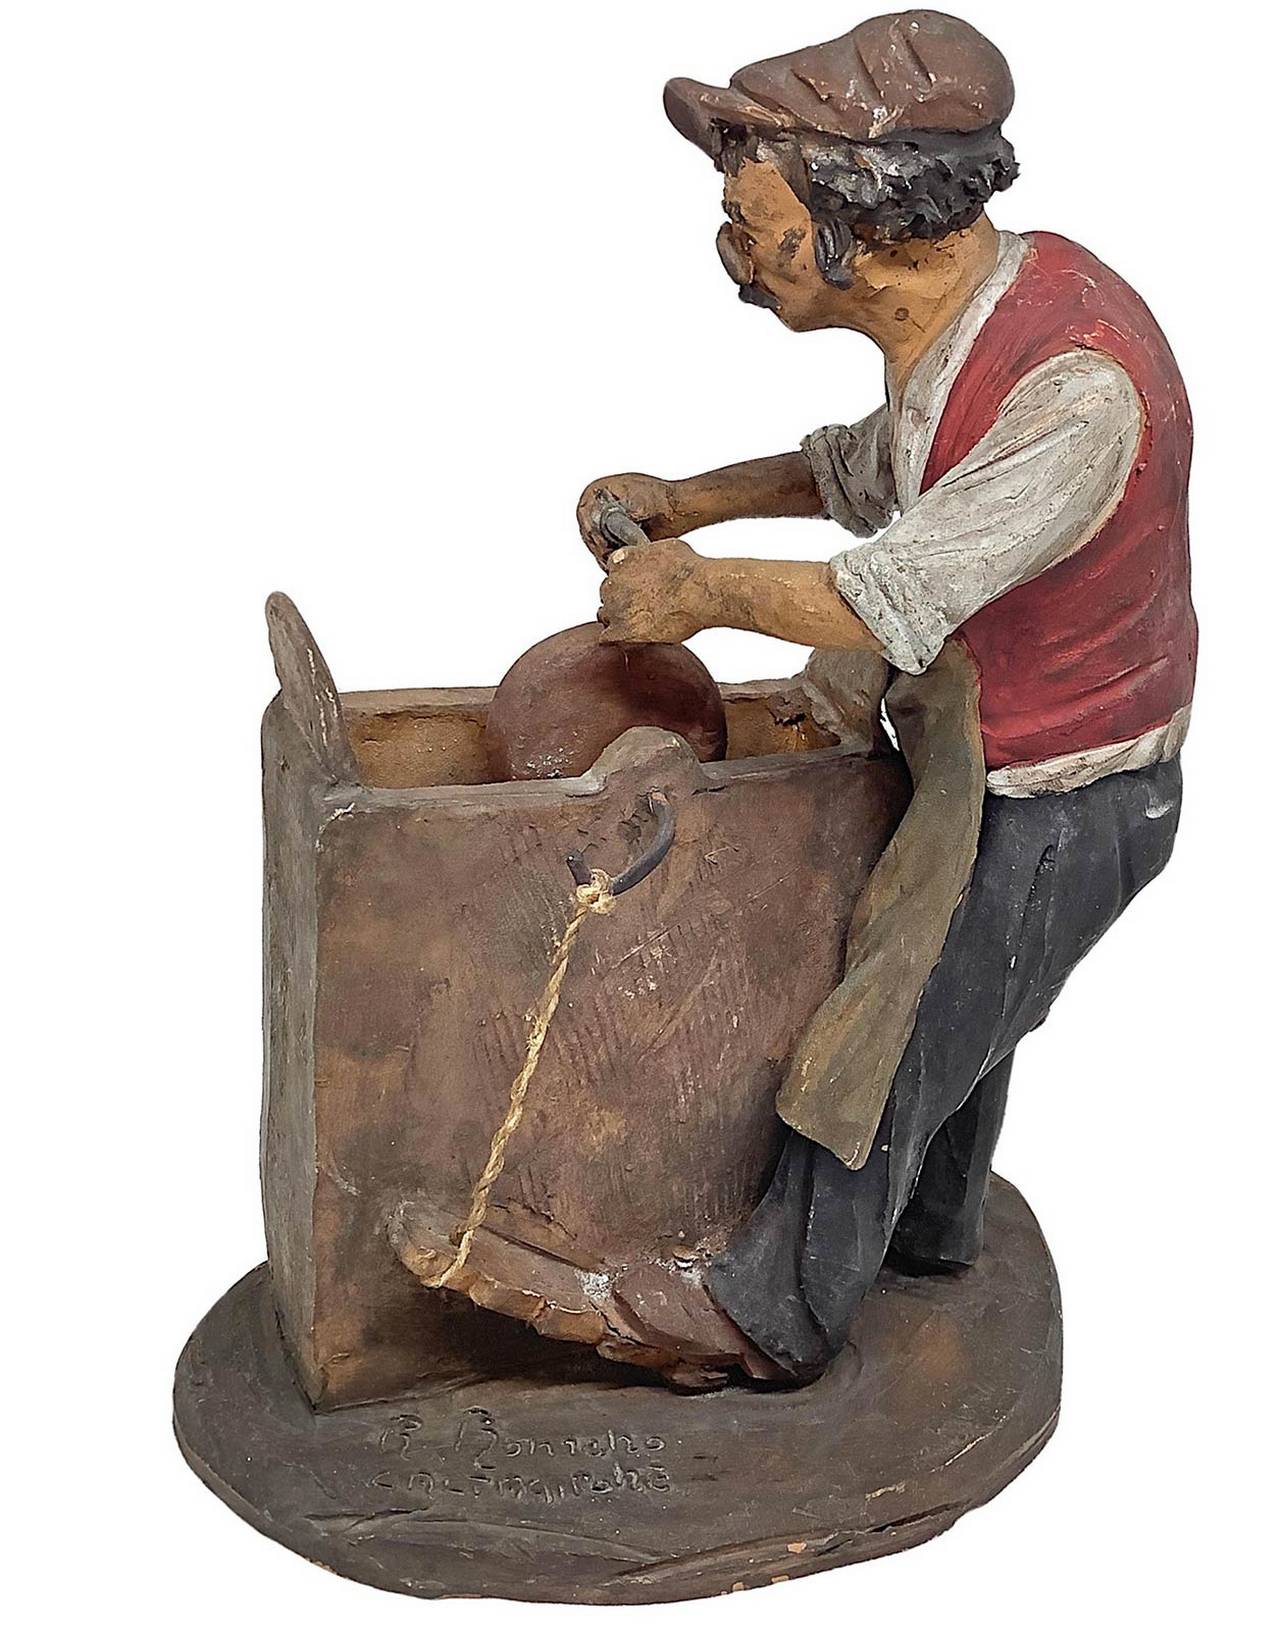 Sculpture in polychrome terracotta grinder. Signed Romano, Caltagirone, 20th century. H 24 cm. - Image 3 of 5